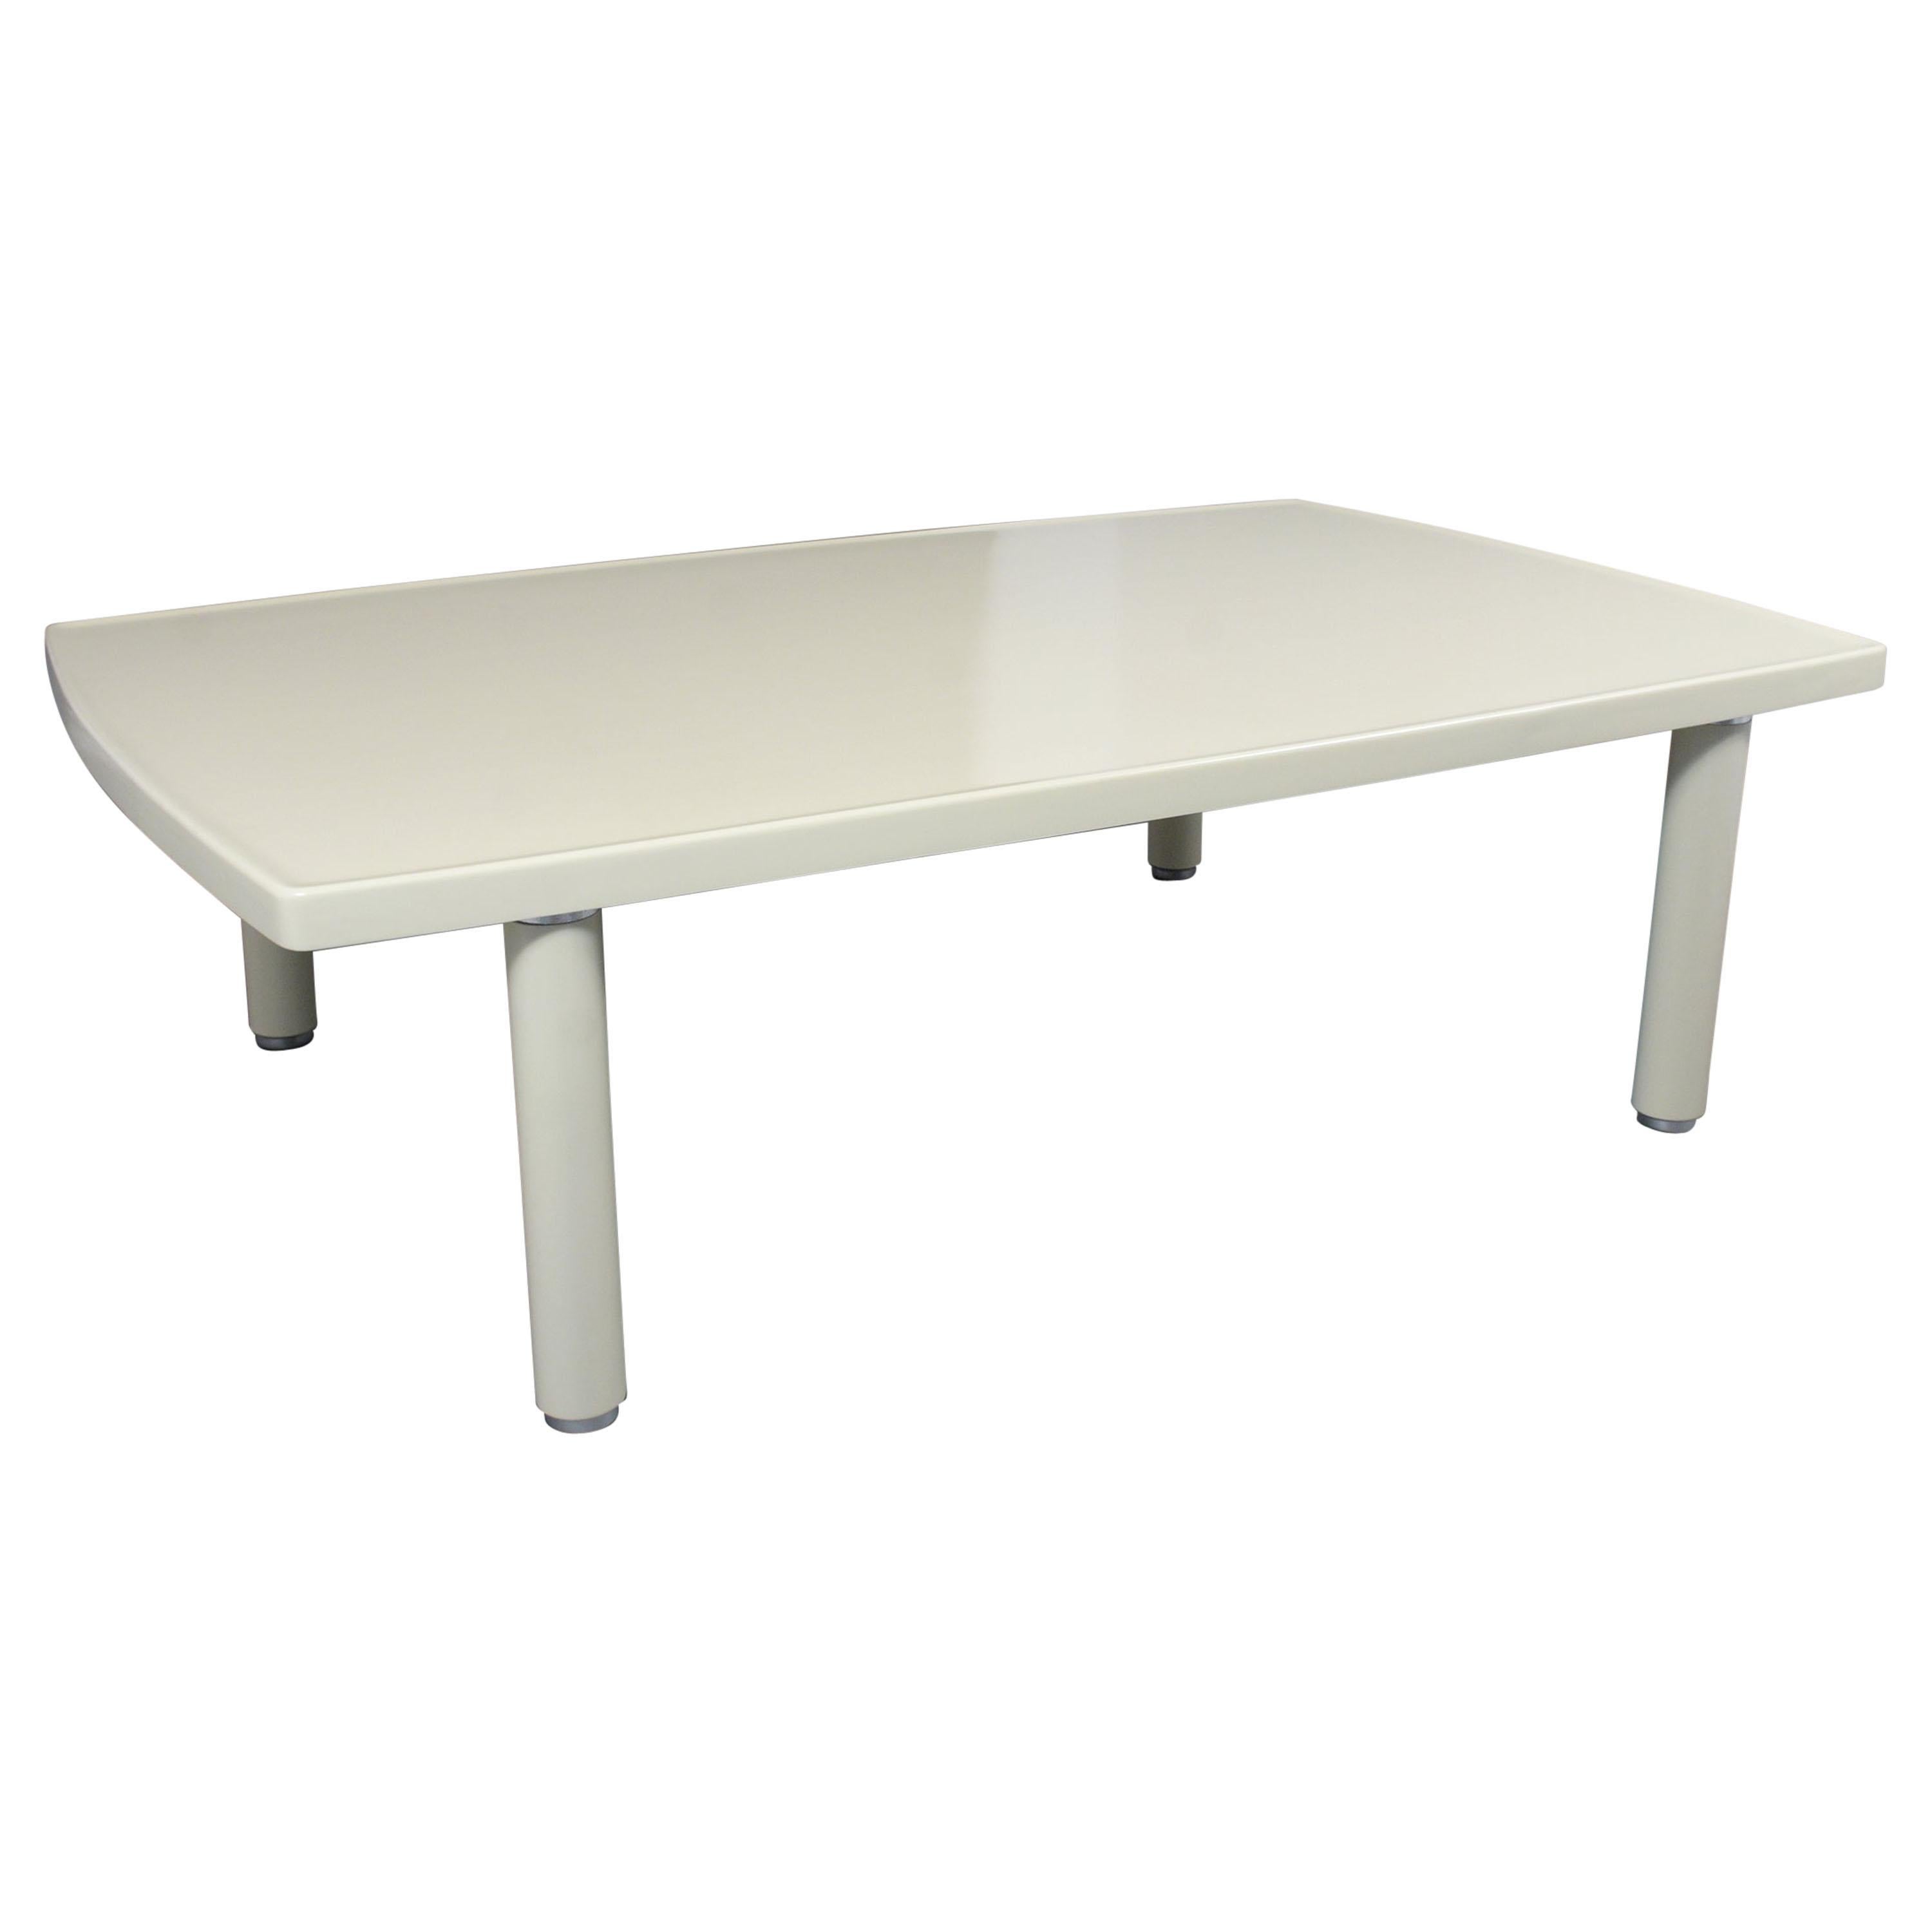 Stewart MacDougall Ivory Cream Dining Table with Silvered Leg Details For Sale